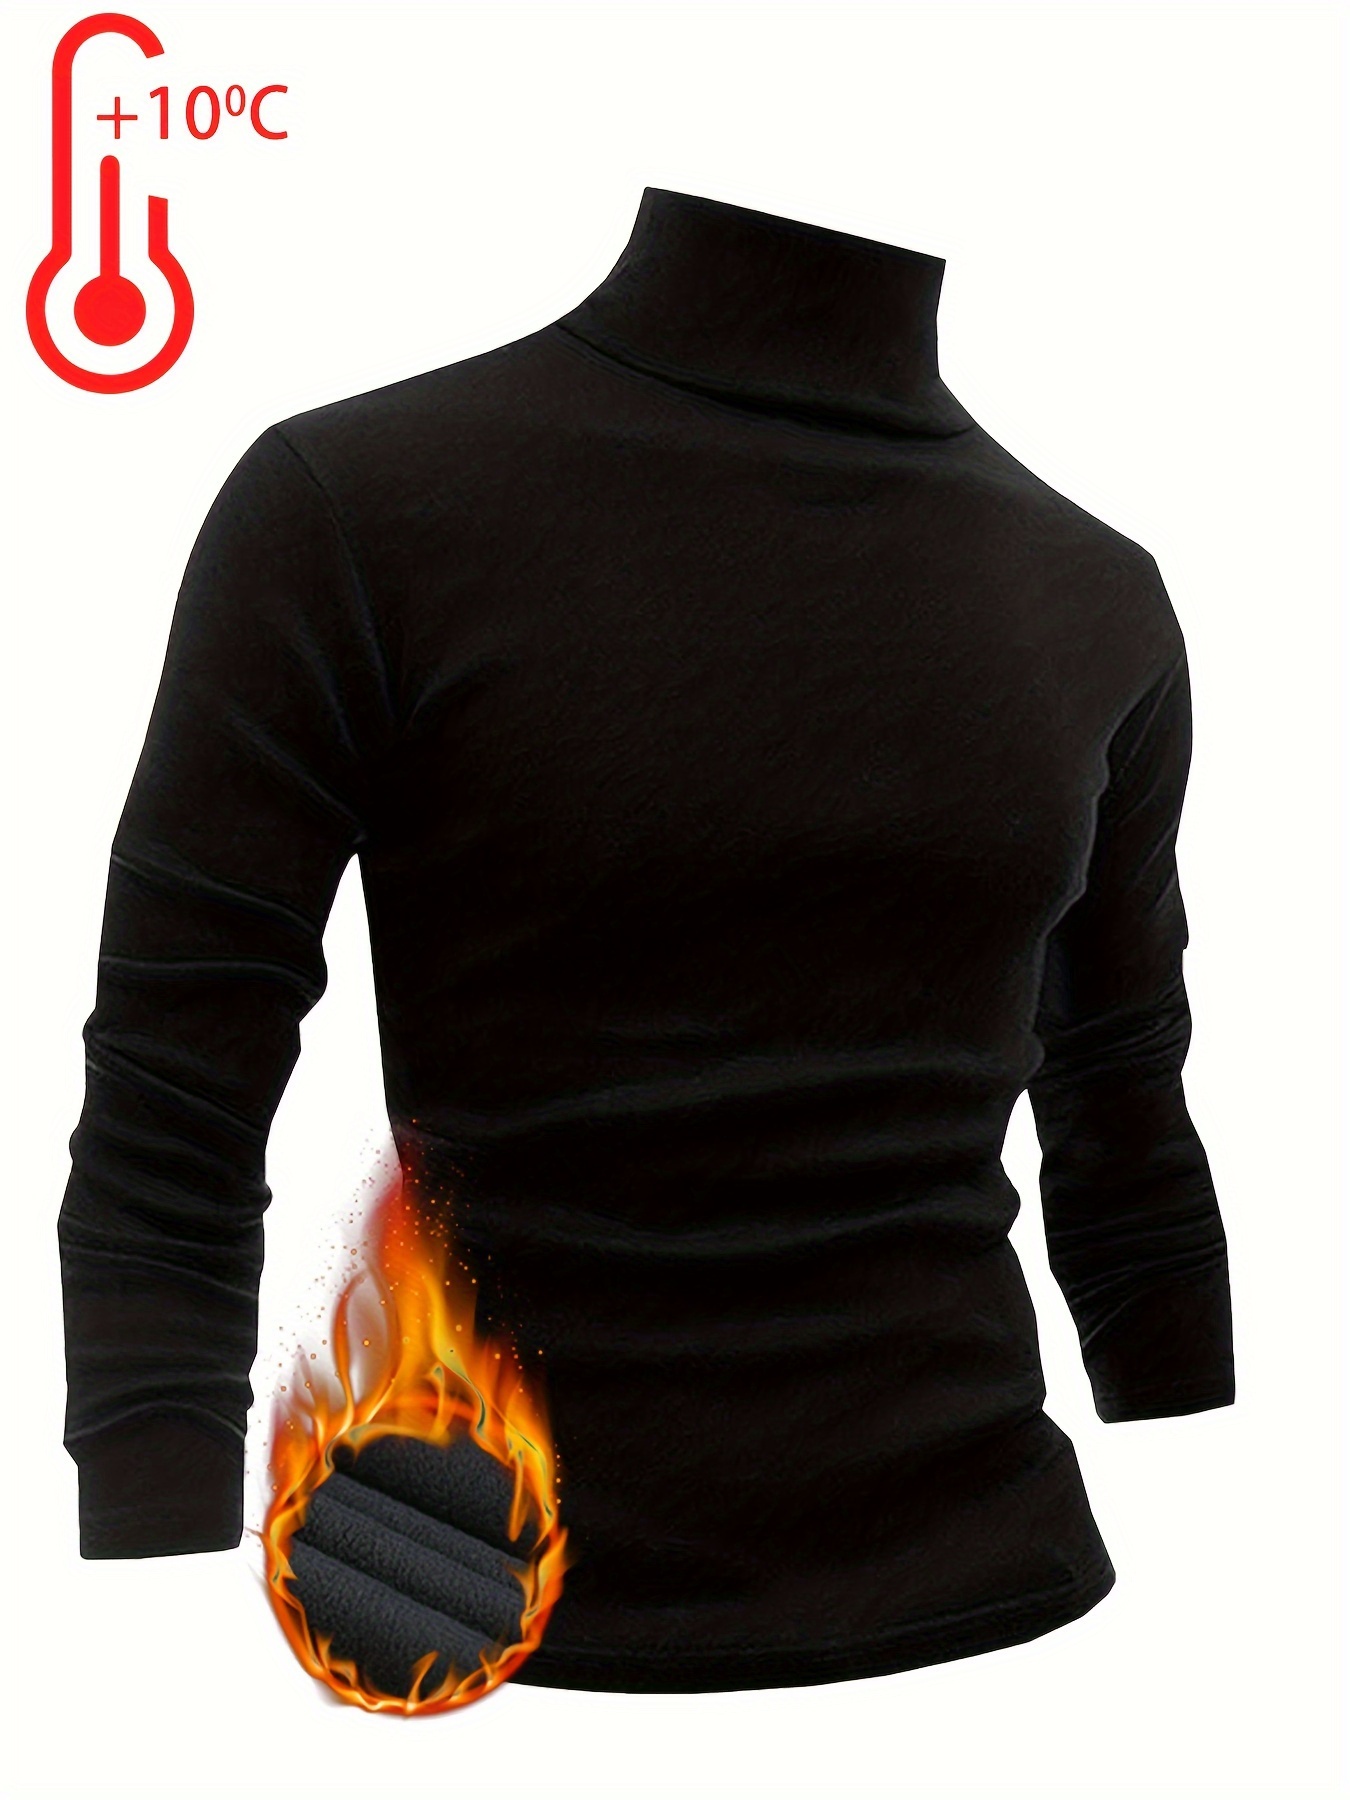 Men's Thermal Fleece Lined Mock Neck Baselayer Tops Long Sleeve Running  Athletic Shirt with Thumbholes